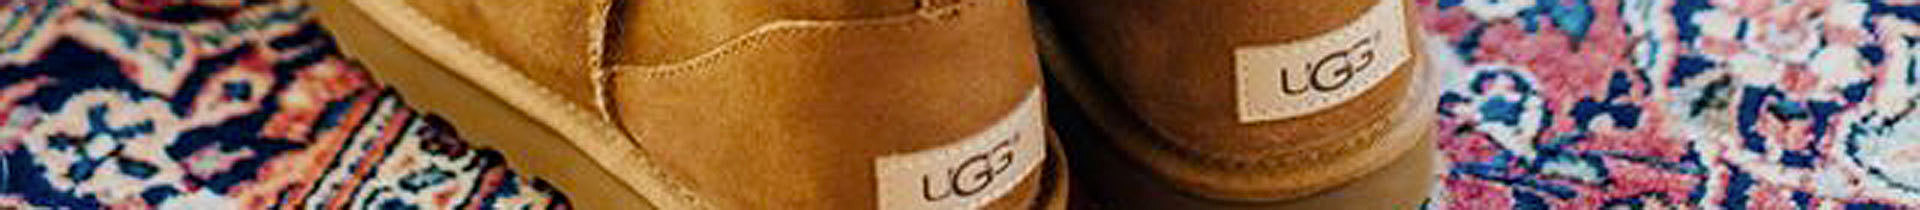 Chaussures Ugg pour femmes